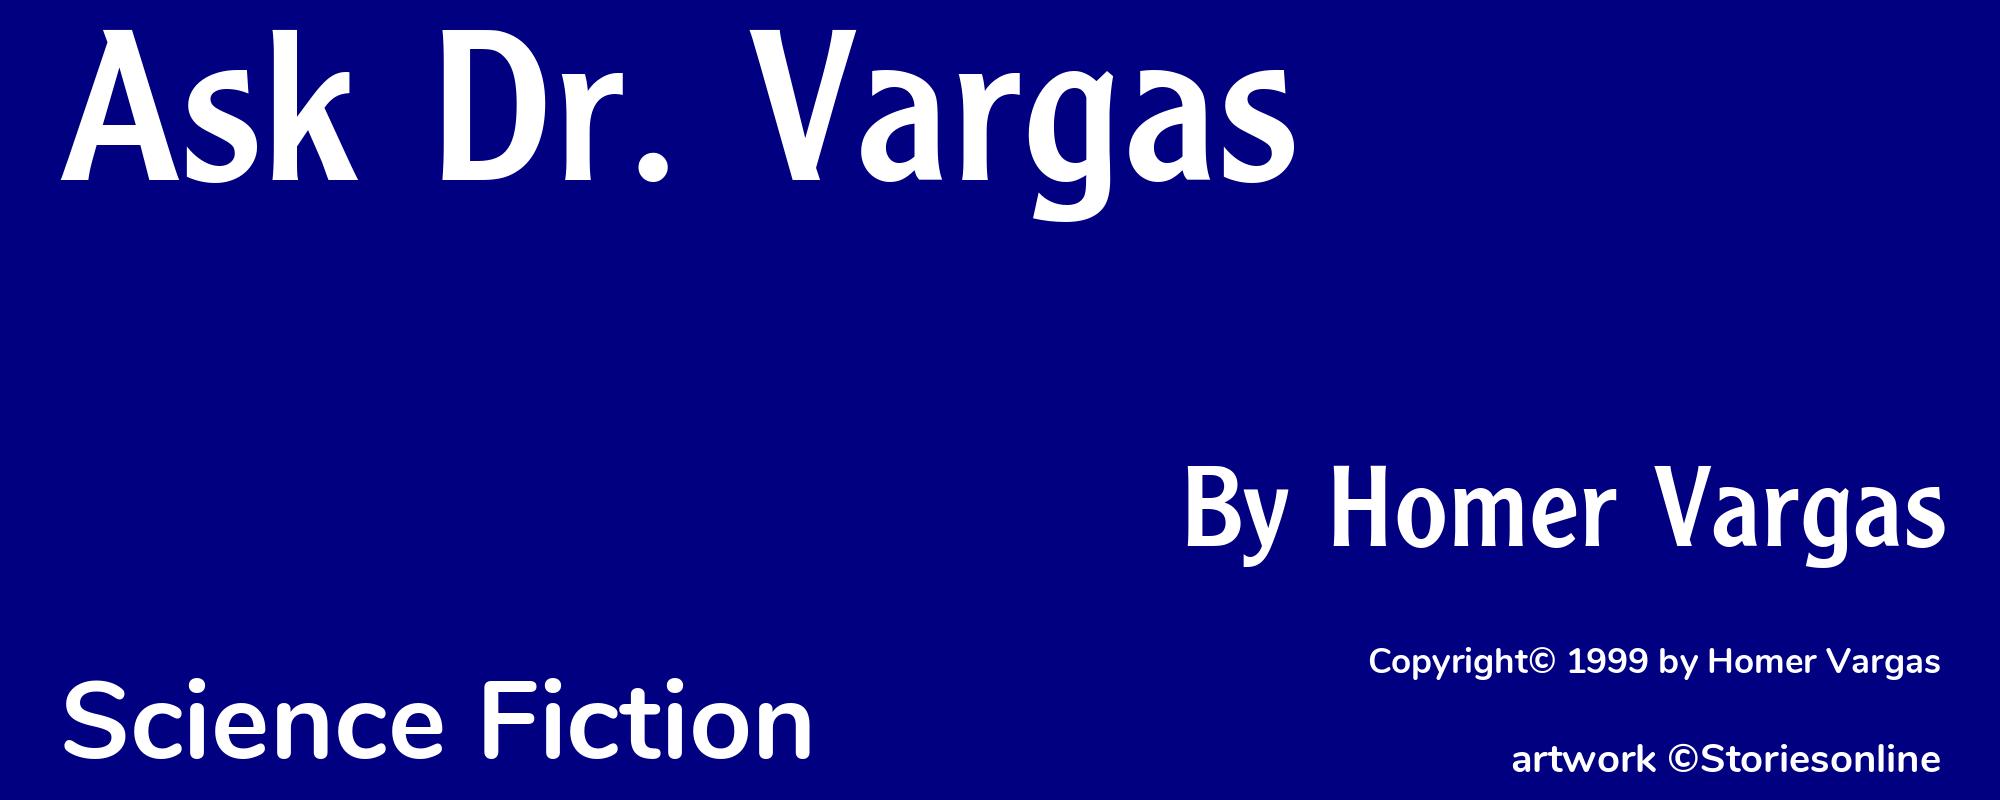 Ask Dr. Vargas - Cover